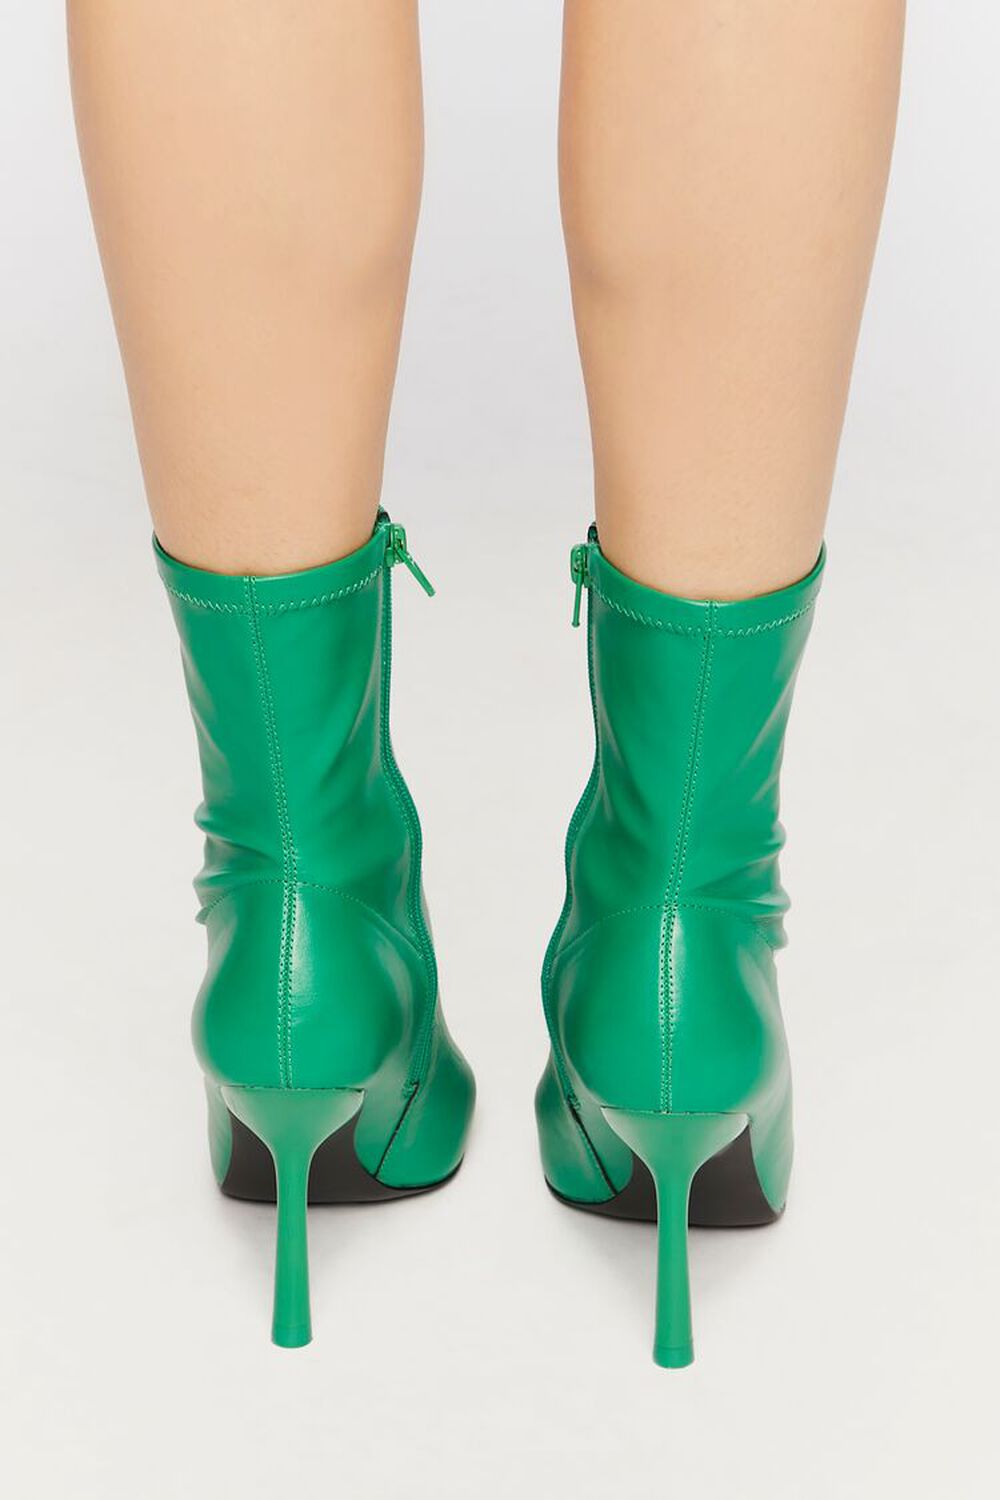 GREEN Faux Leather Stiletto Booties, image 3